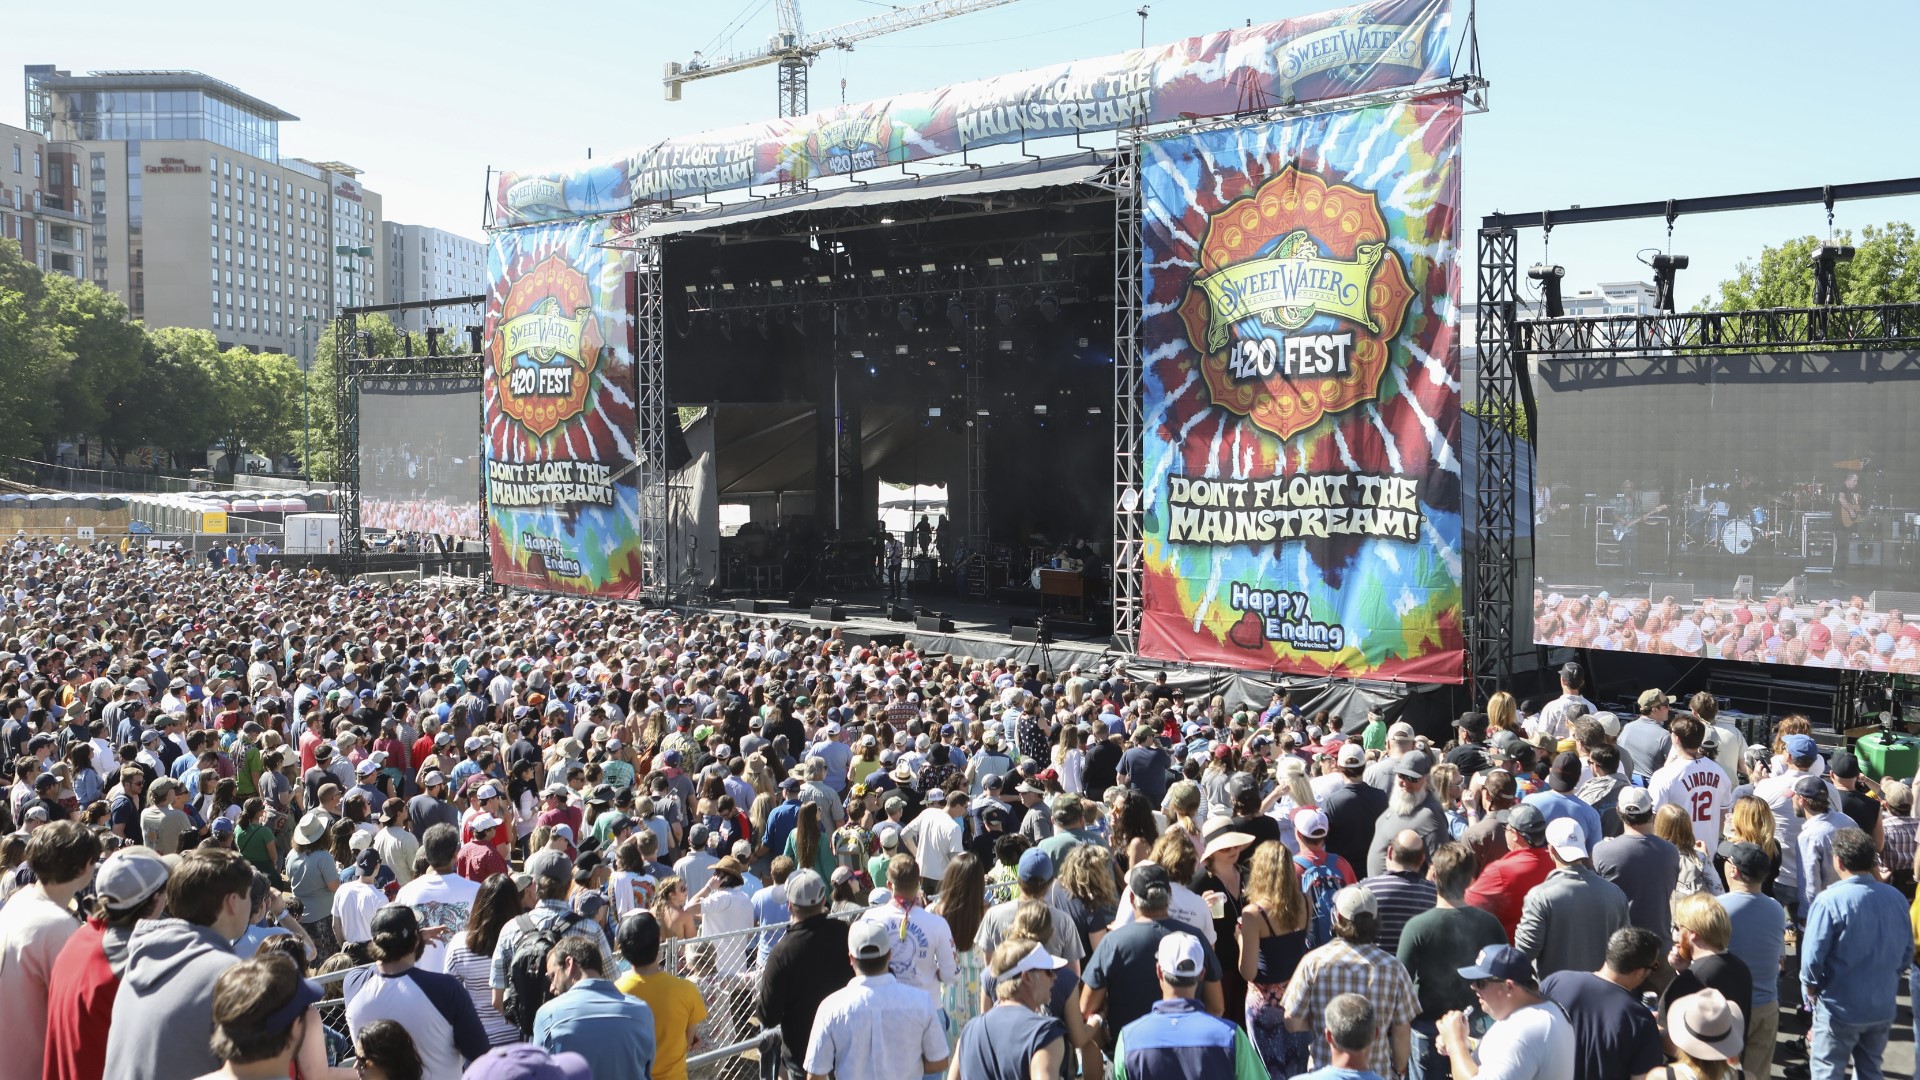 With just weeks away from Atlanta's jamming Sweetwater 420 Fest, organizers announced some changes on Friday.